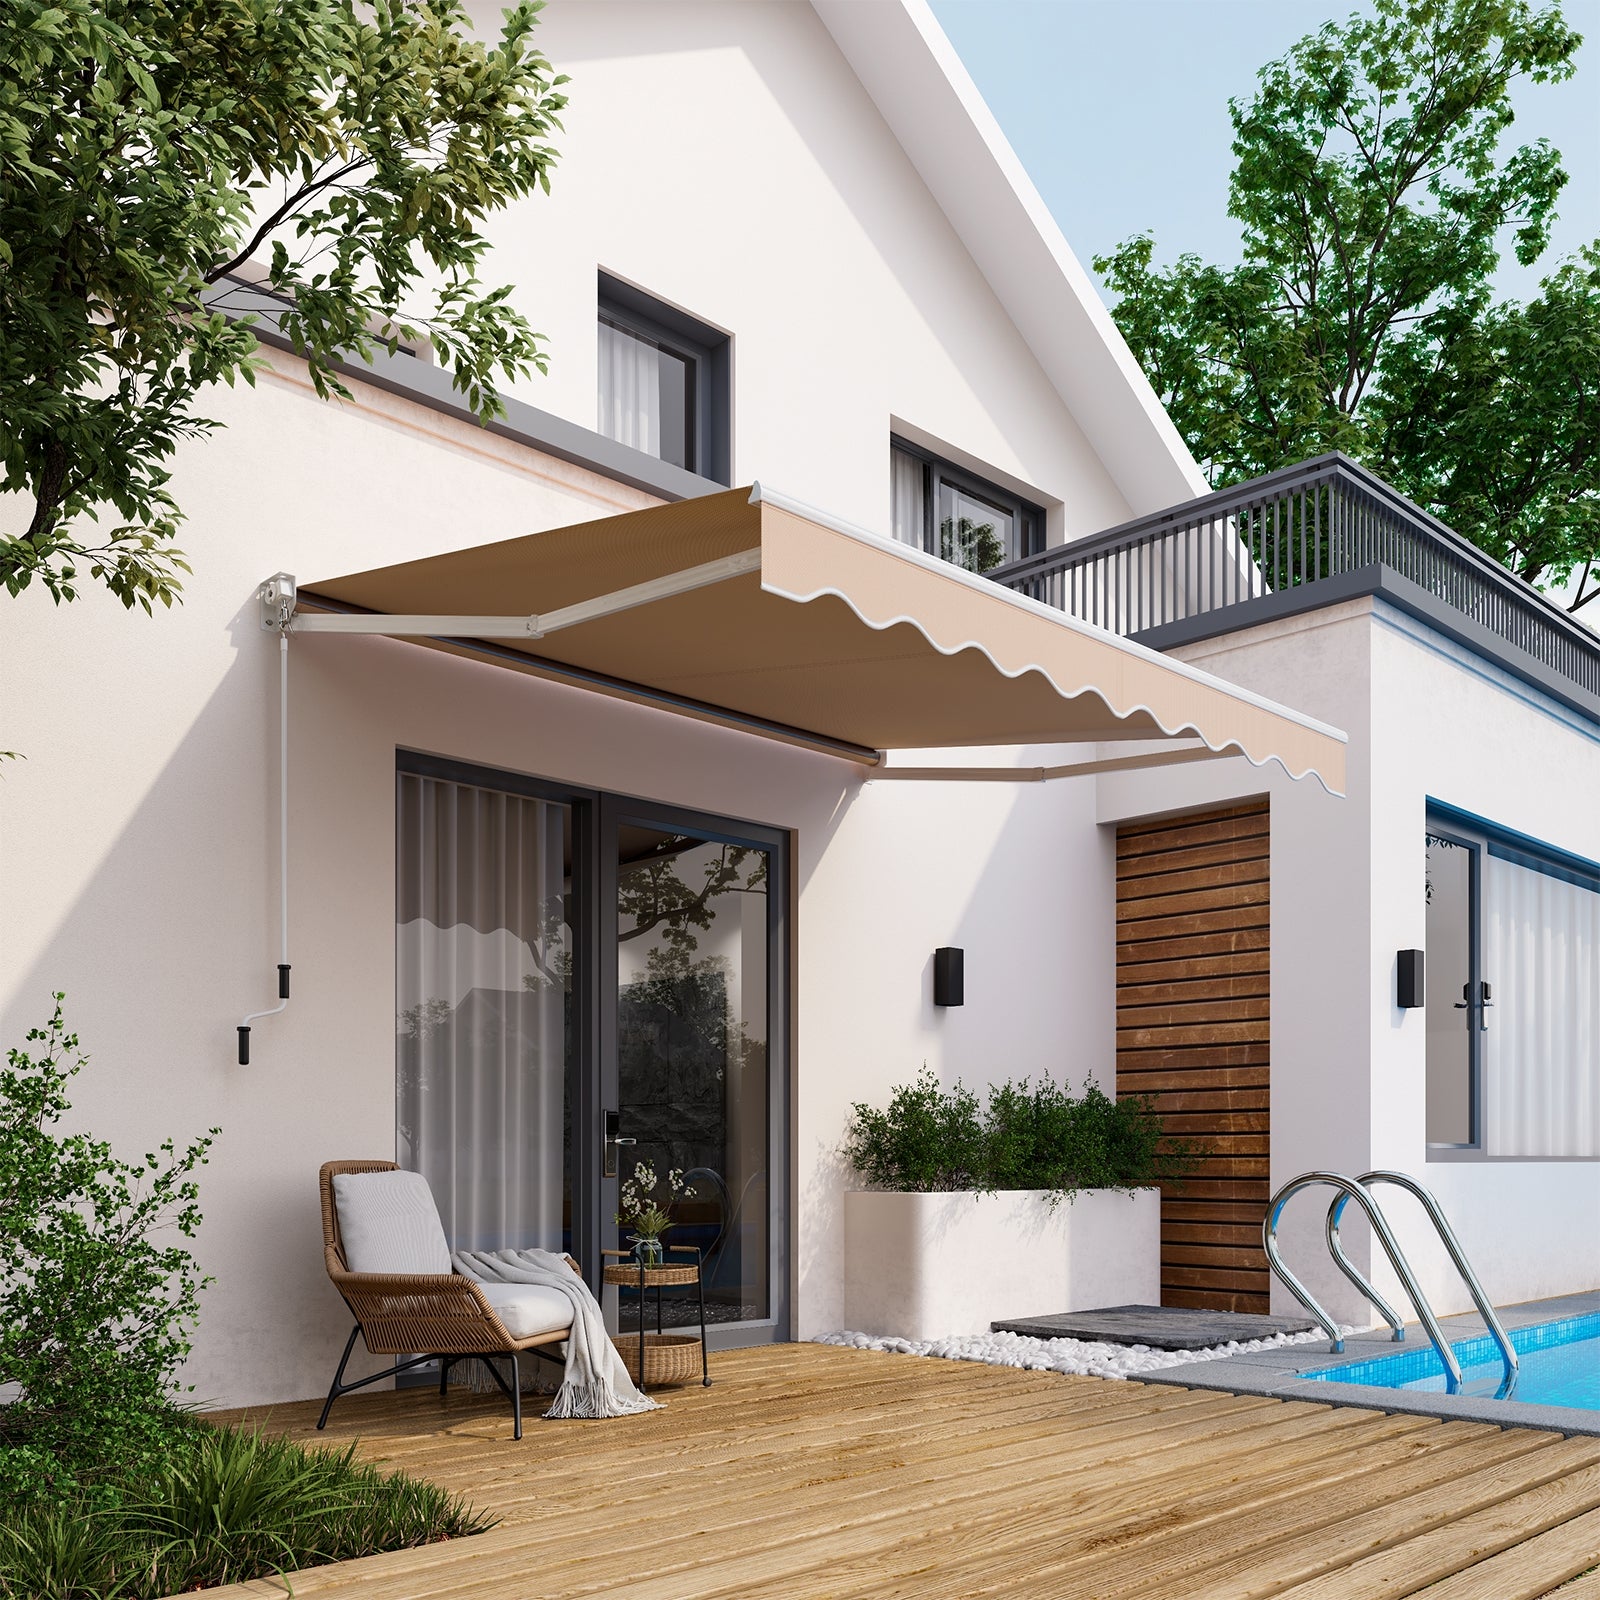 Wide Application: With its classic design and beautiful wavy edge, this retractable awning adds a decorative touch to any space. Measuring 8' x 6.6', it is suitable for various doors and windows, making it perfect for use on patios, balconies, decks, gardens, restaurants, cafes, and more.